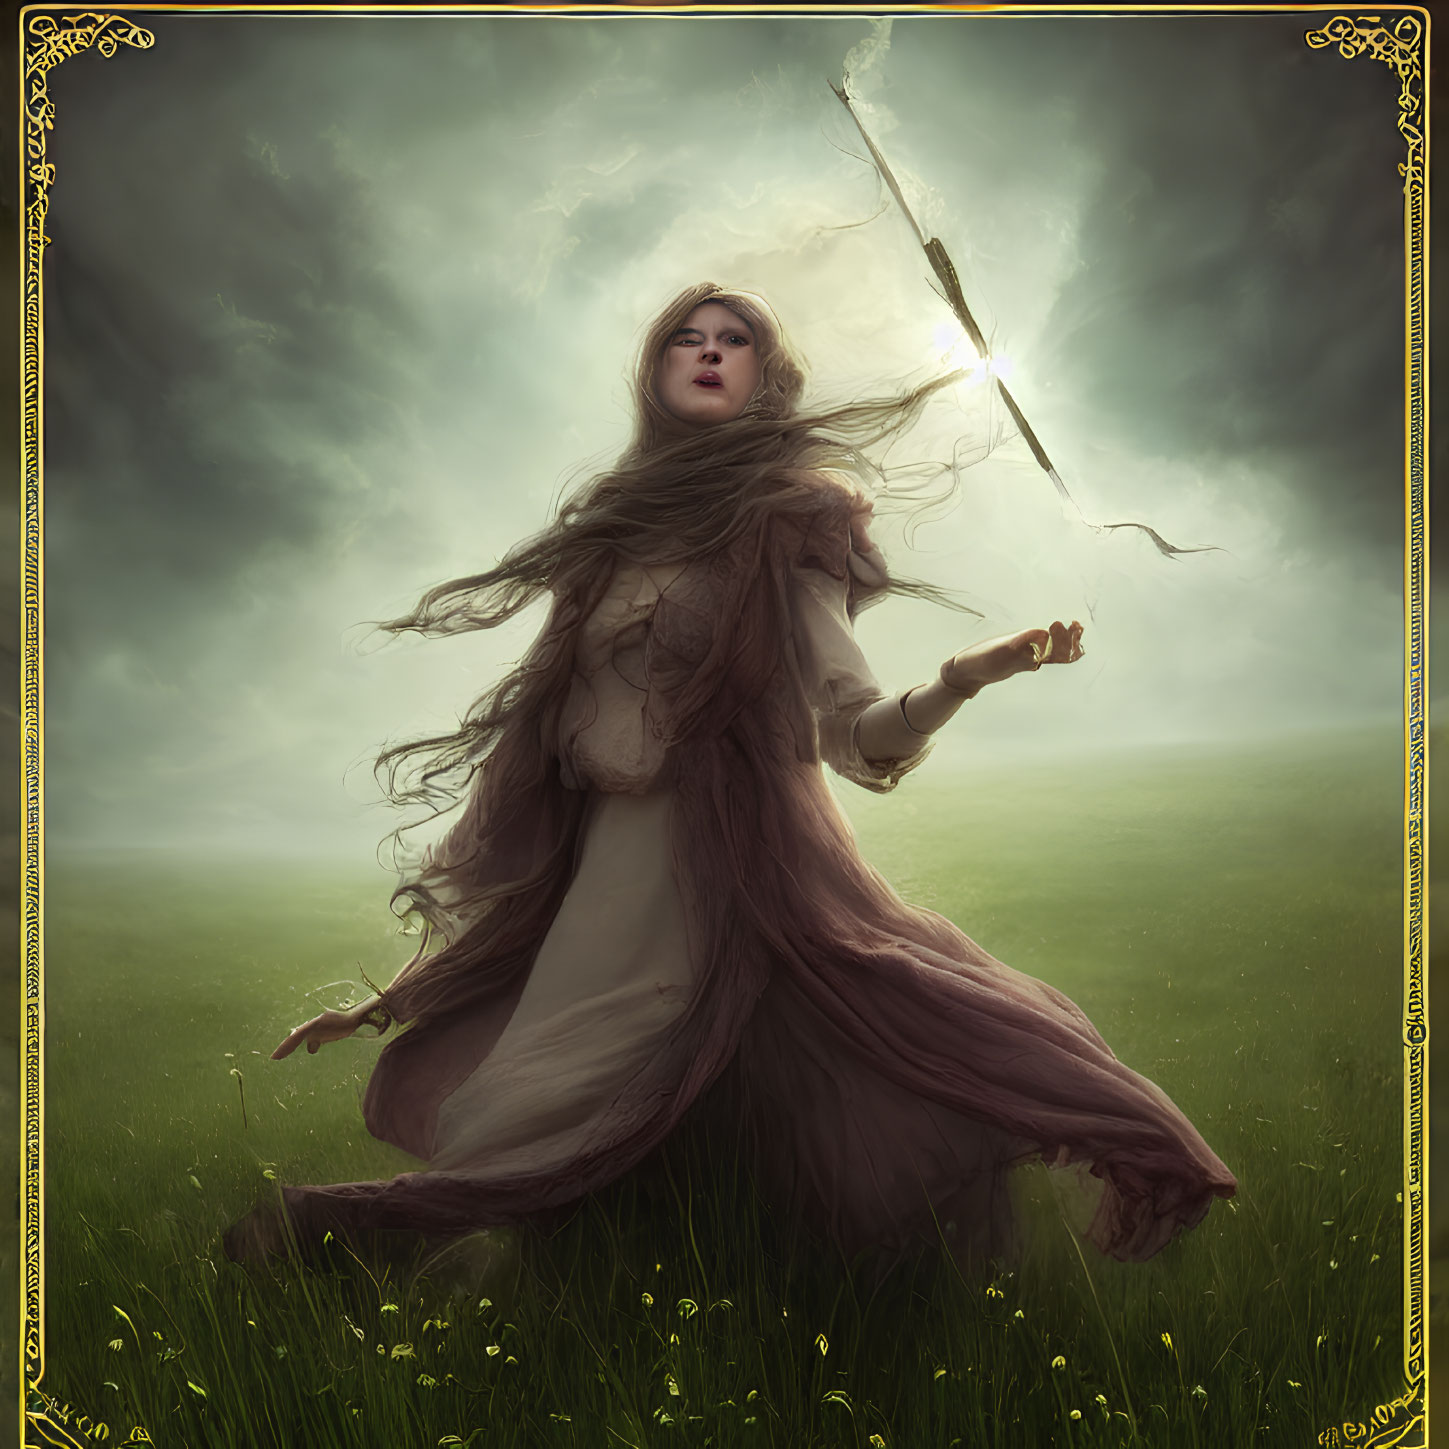 Woman in flowing dress in field with dramatic sky and lightning, framed scene